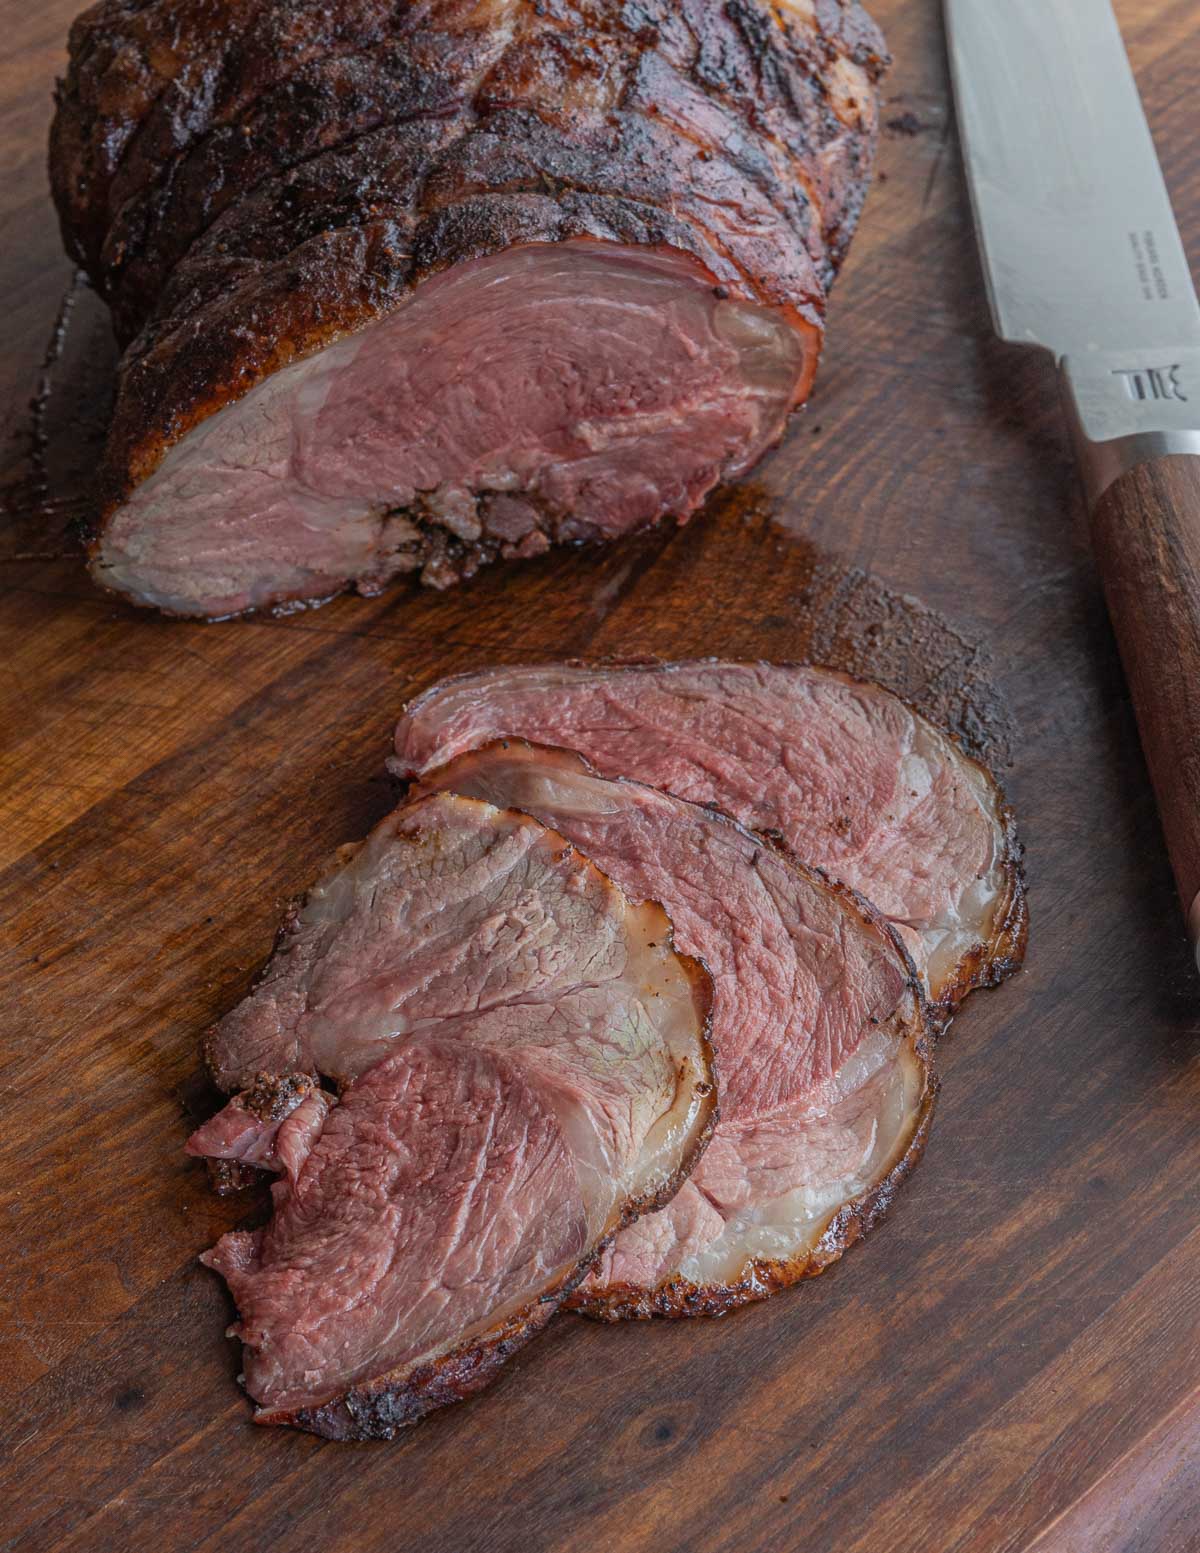 A sliced, smoked leg of lamb next to a knife on a cutting board.